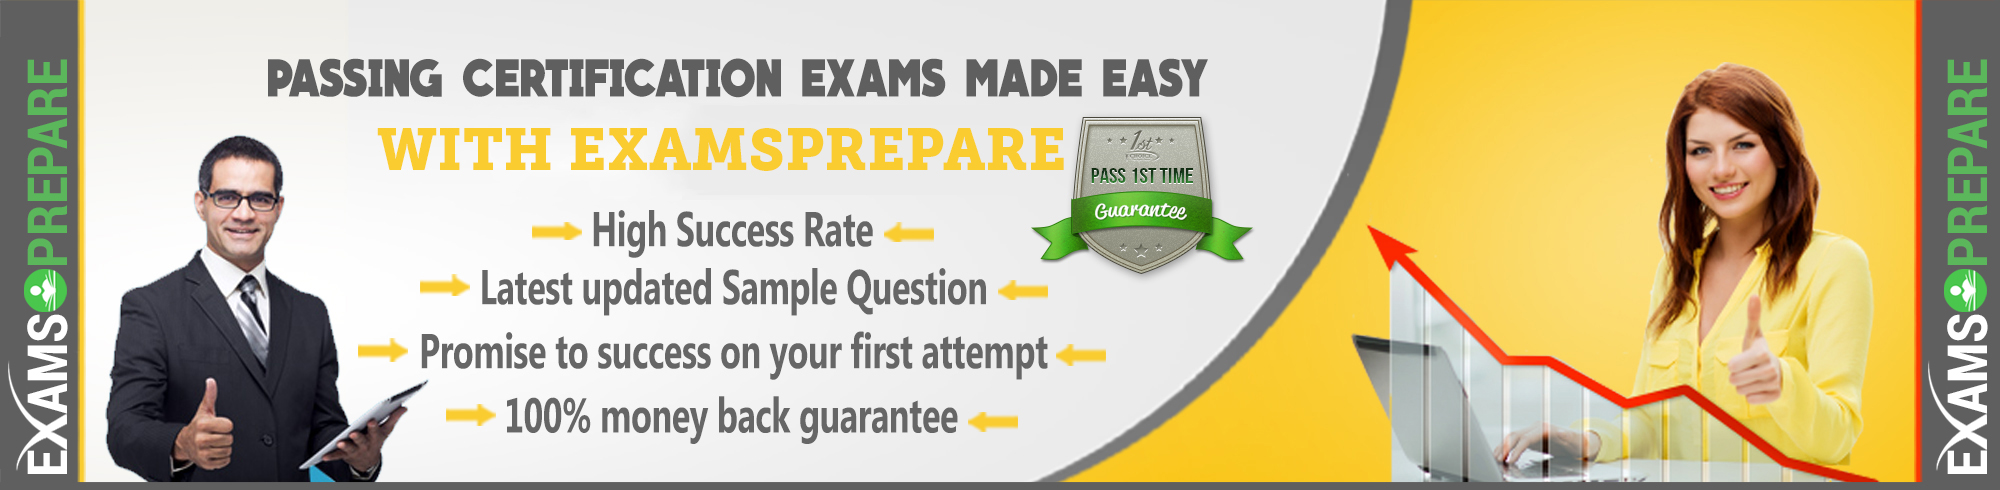 Learn with Real 1Z0-931-20 Exam Dumps